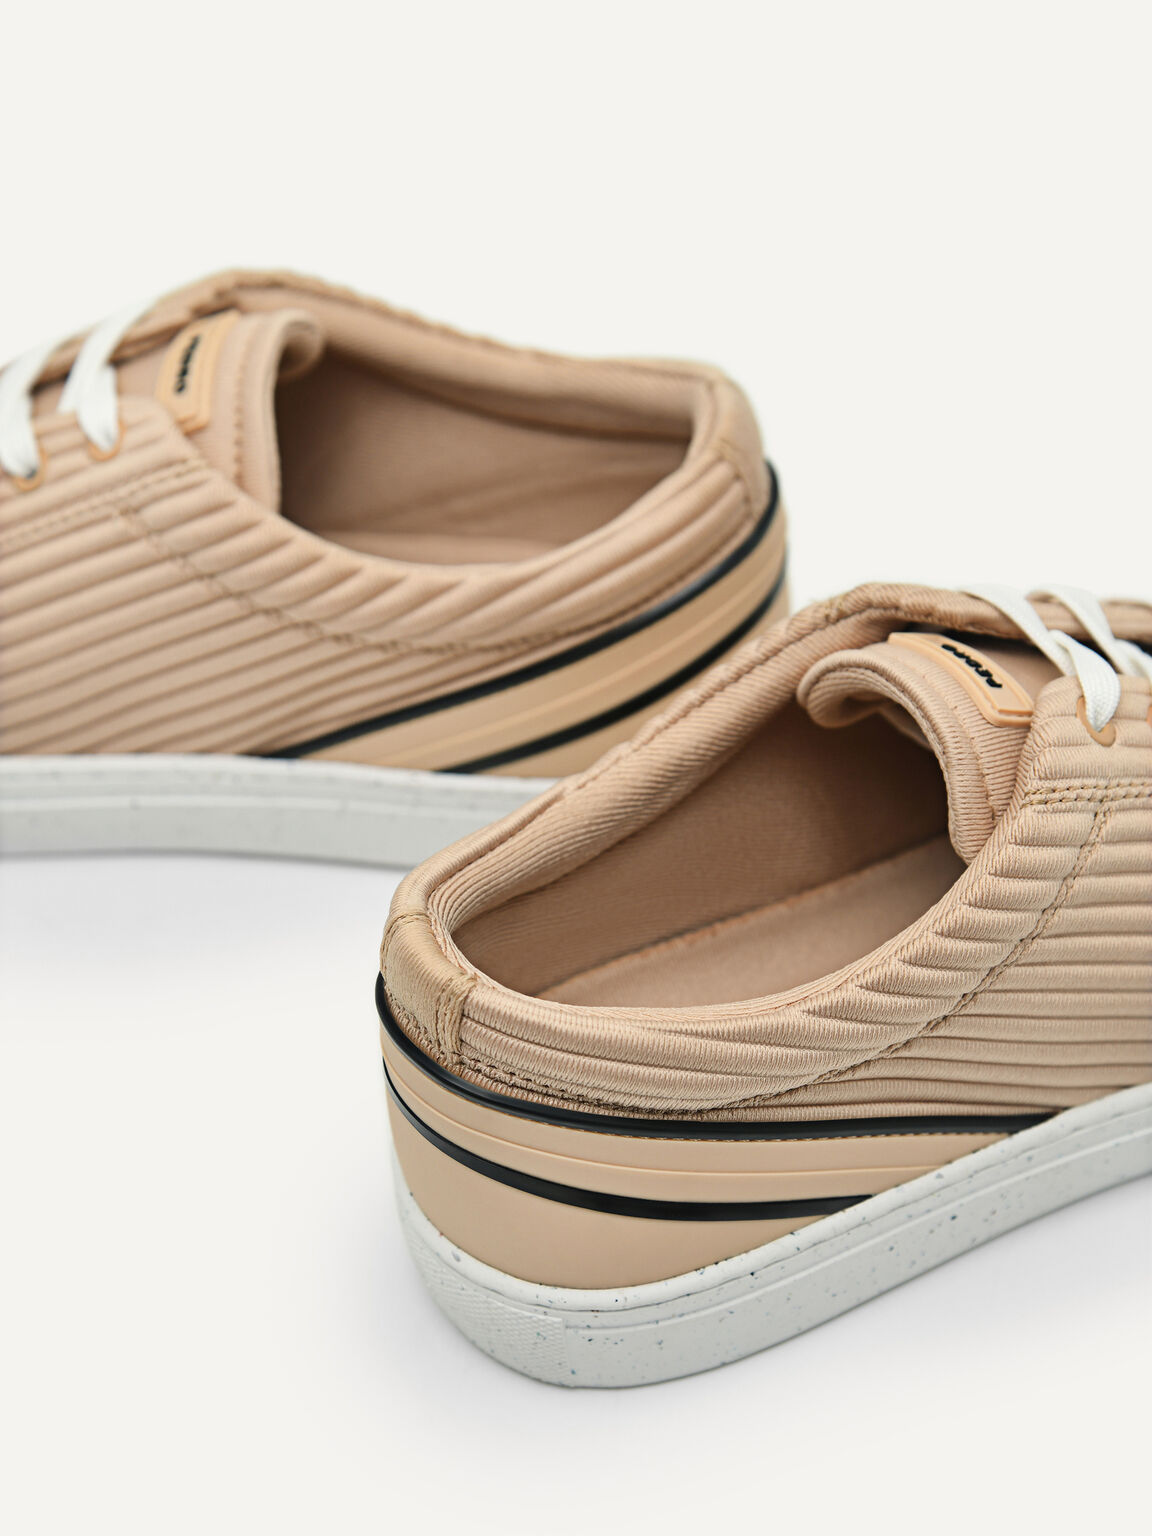 rePEDRO Pleated Sneakers, Nude, hi-res